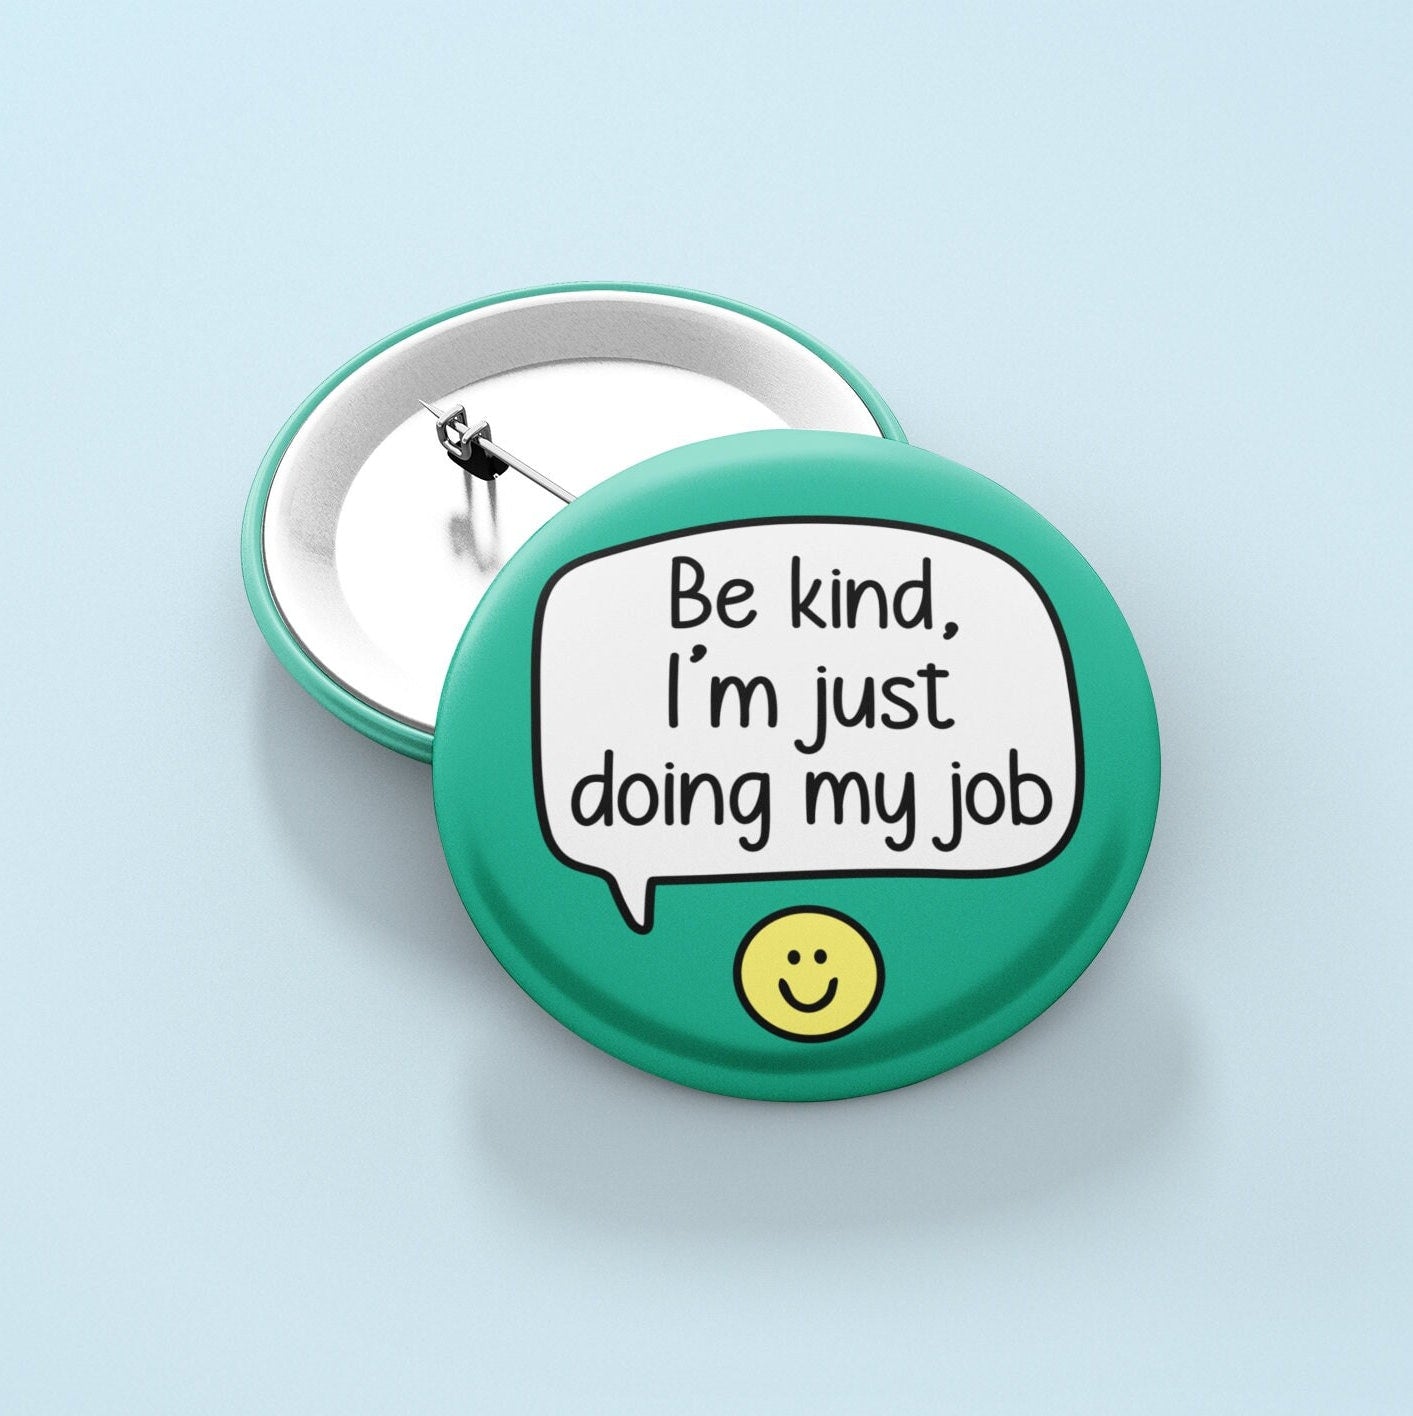 Be Kind, I'm Just Doing My Job - Pin Badge | Colleague Gifts, Worker Pins, Be Nice